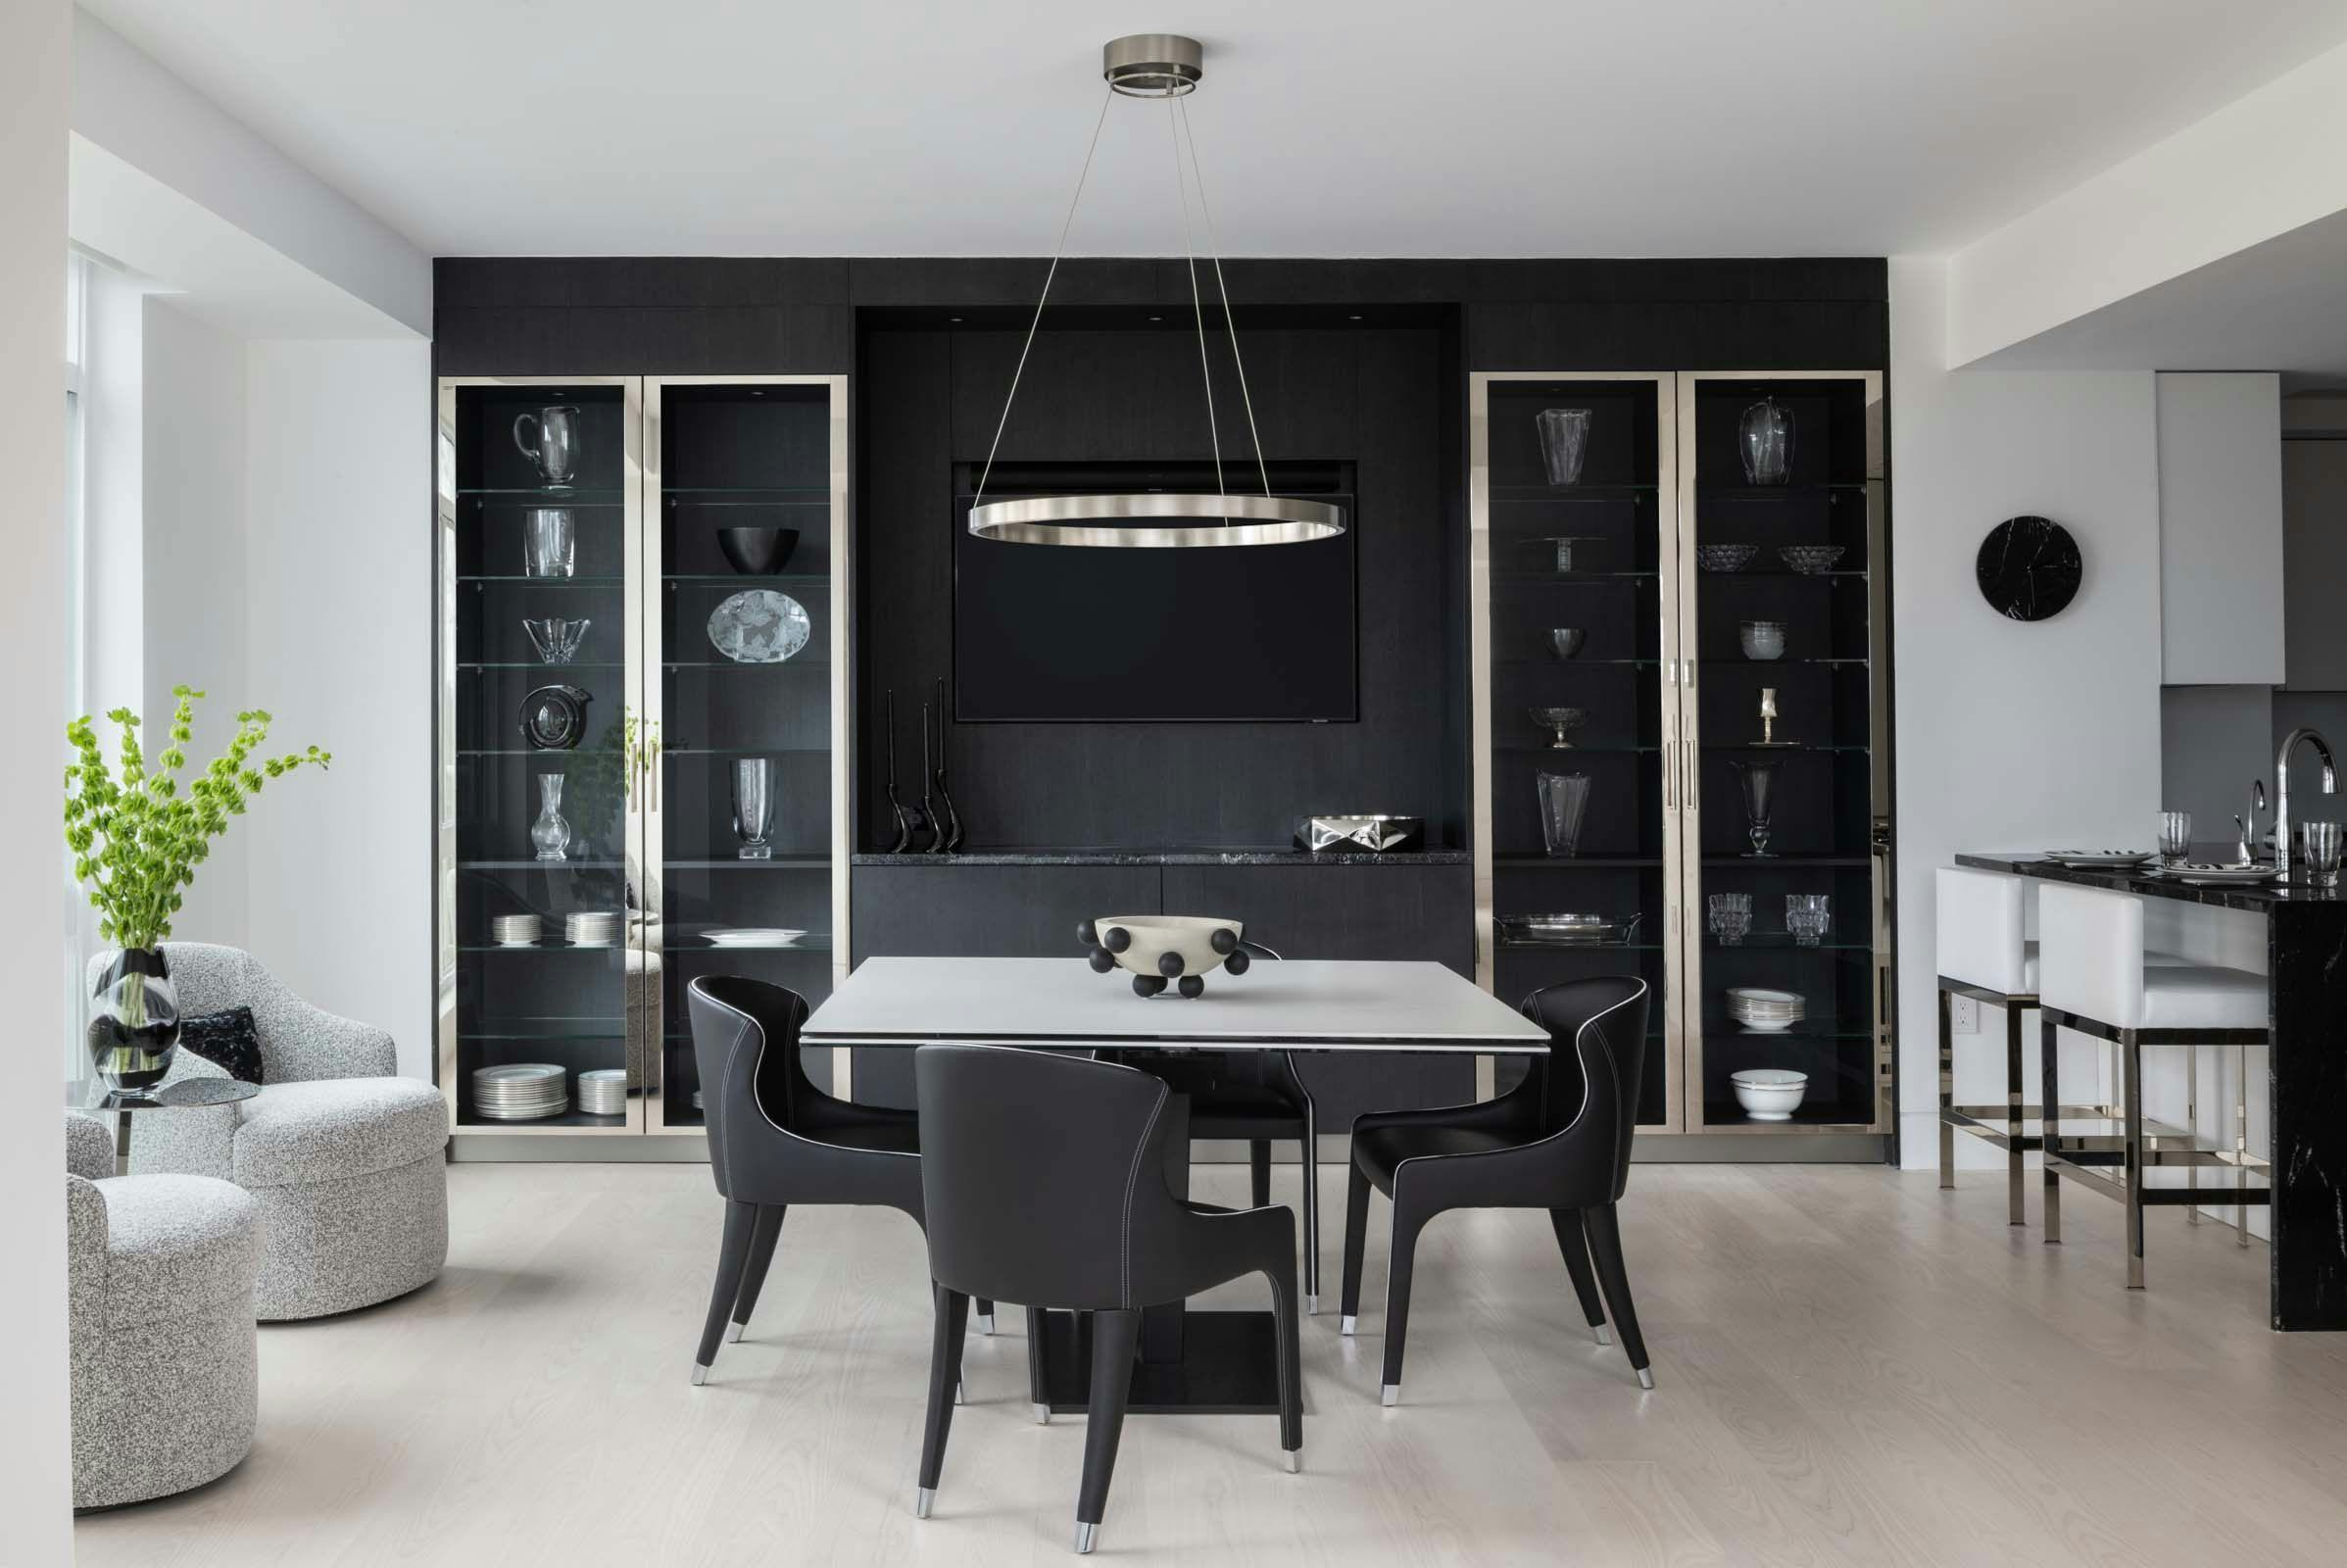 Somerset dining room area with black accents